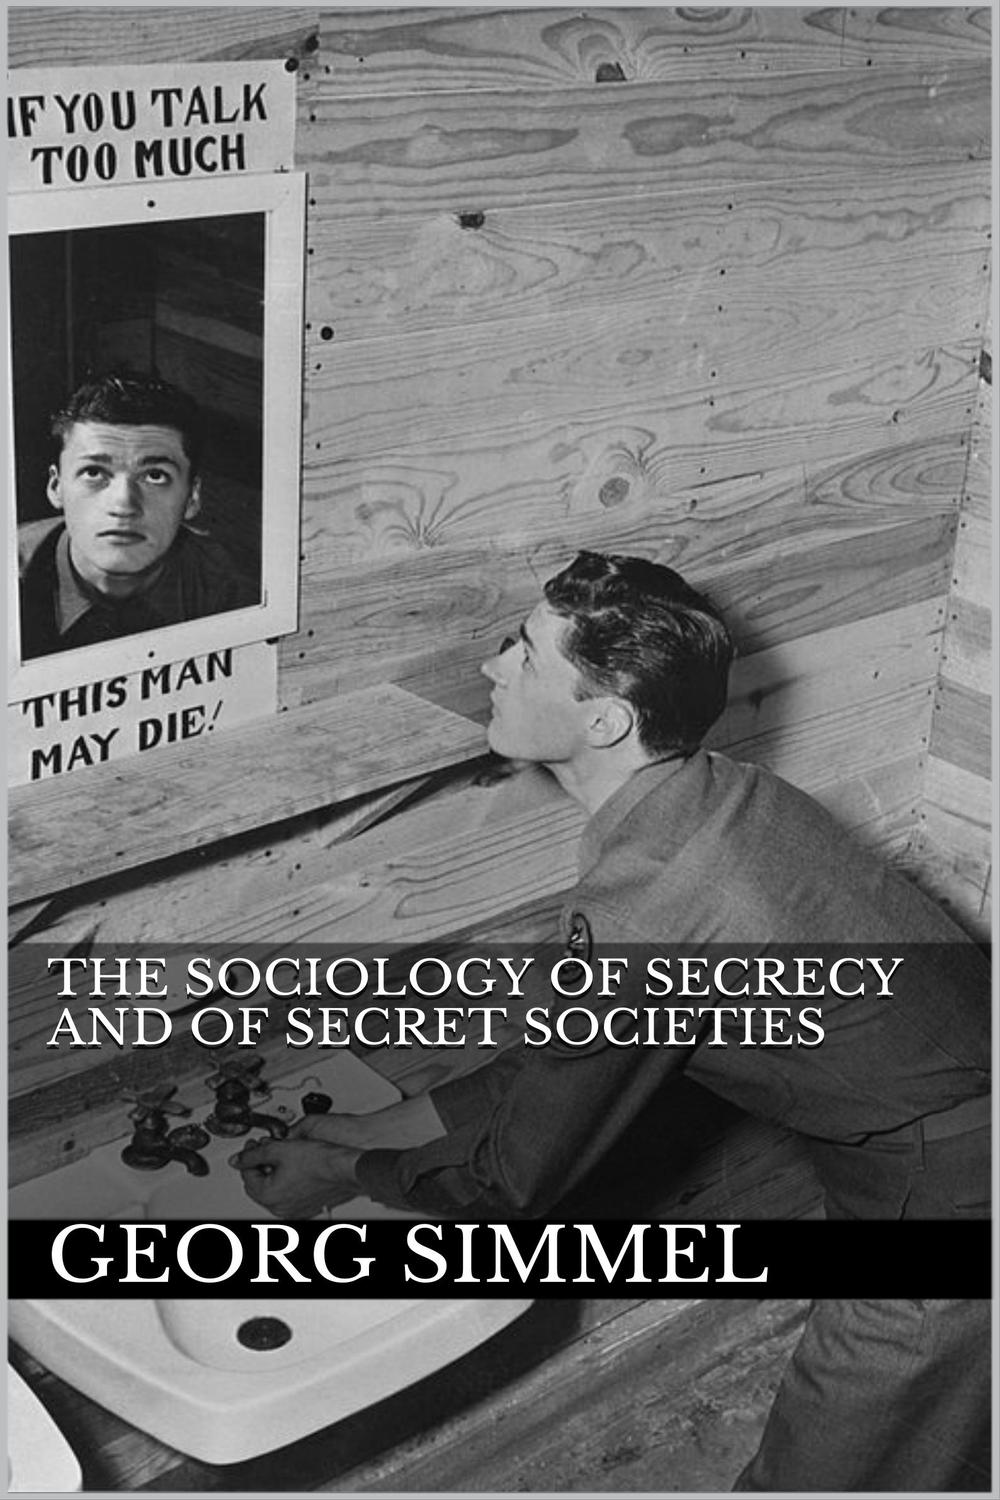 The Sociology of Secrecy and of Secret Societies - Georg Simmel